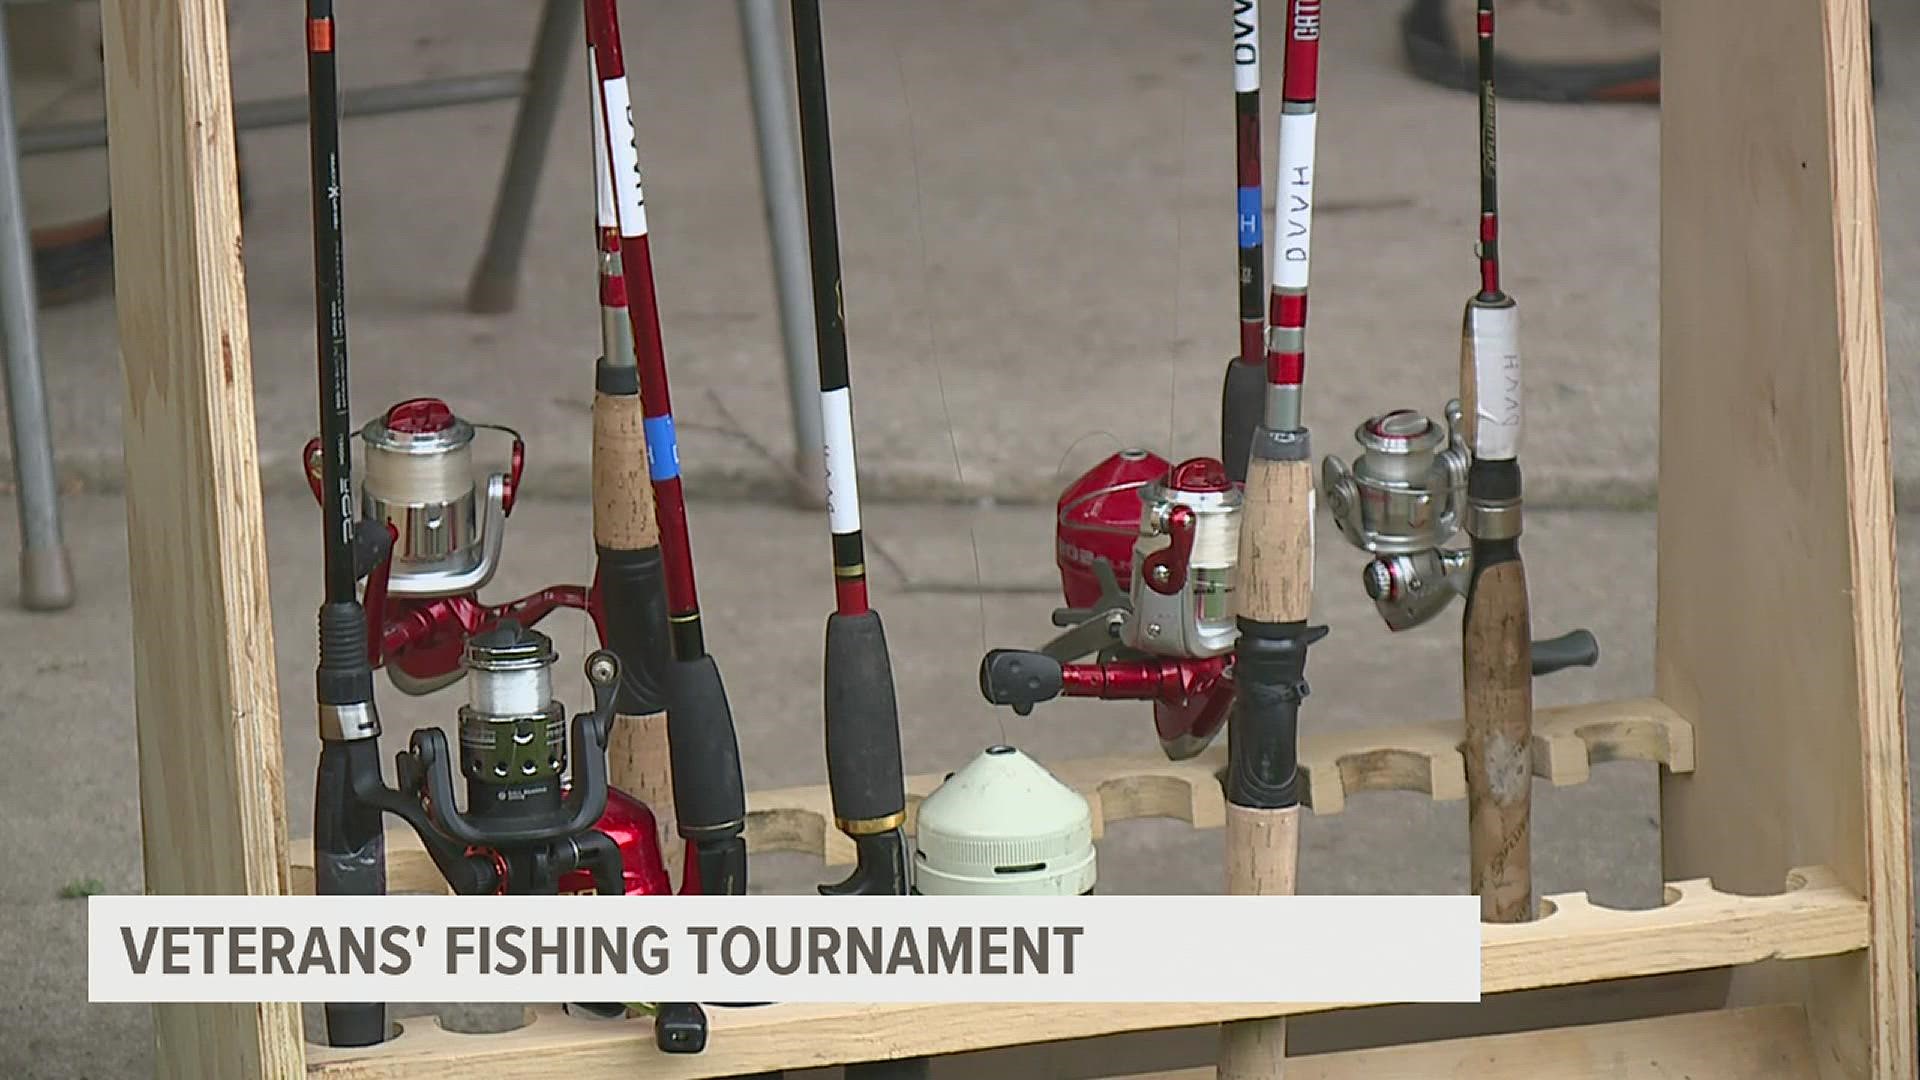 Dozens of military veterans demonstrated their angling skills Tuesday afternoon.